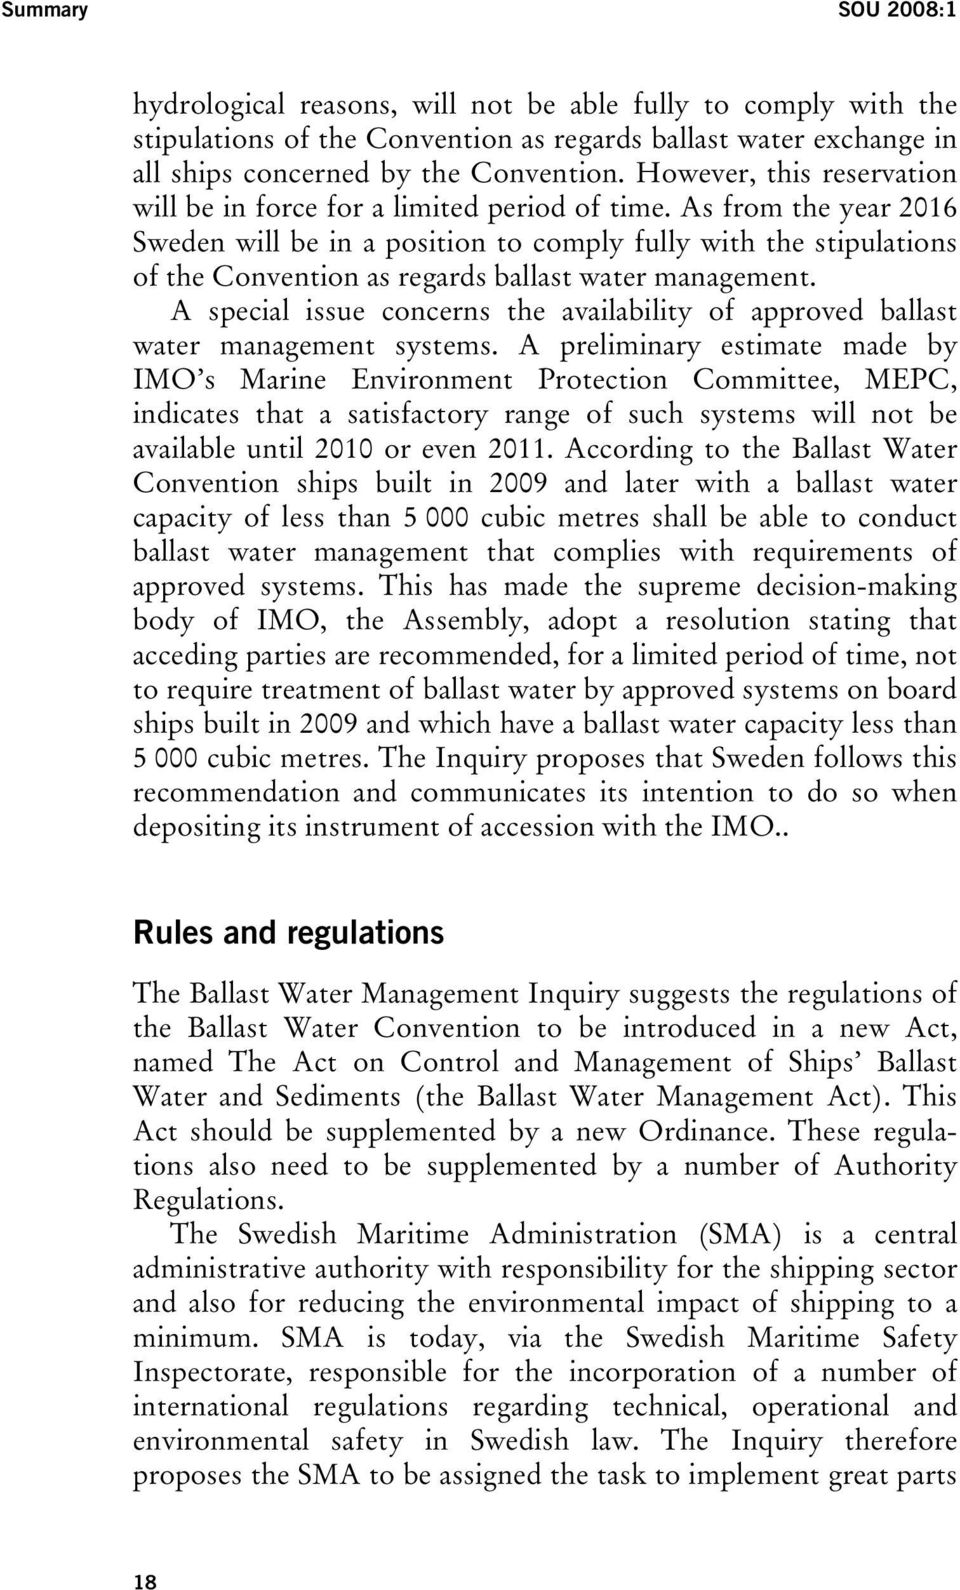 As from the year 2016 Sweden will be in a position to comply fully with the stipulations of the Convention as regards ballast water management.